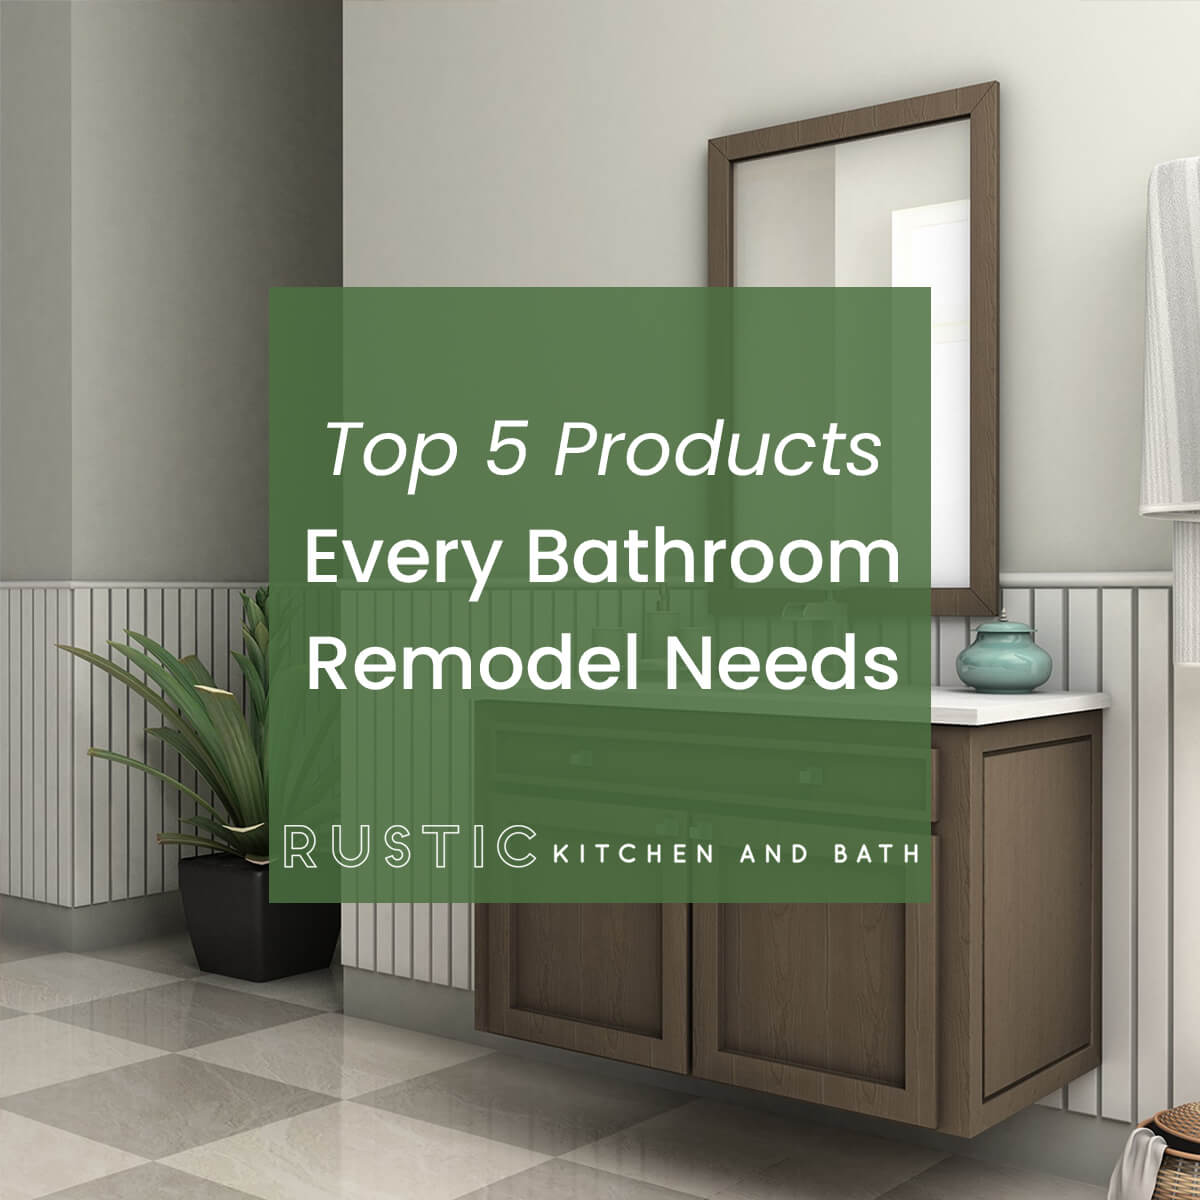 Top 5 Products Every Bathroom Remodel Needs